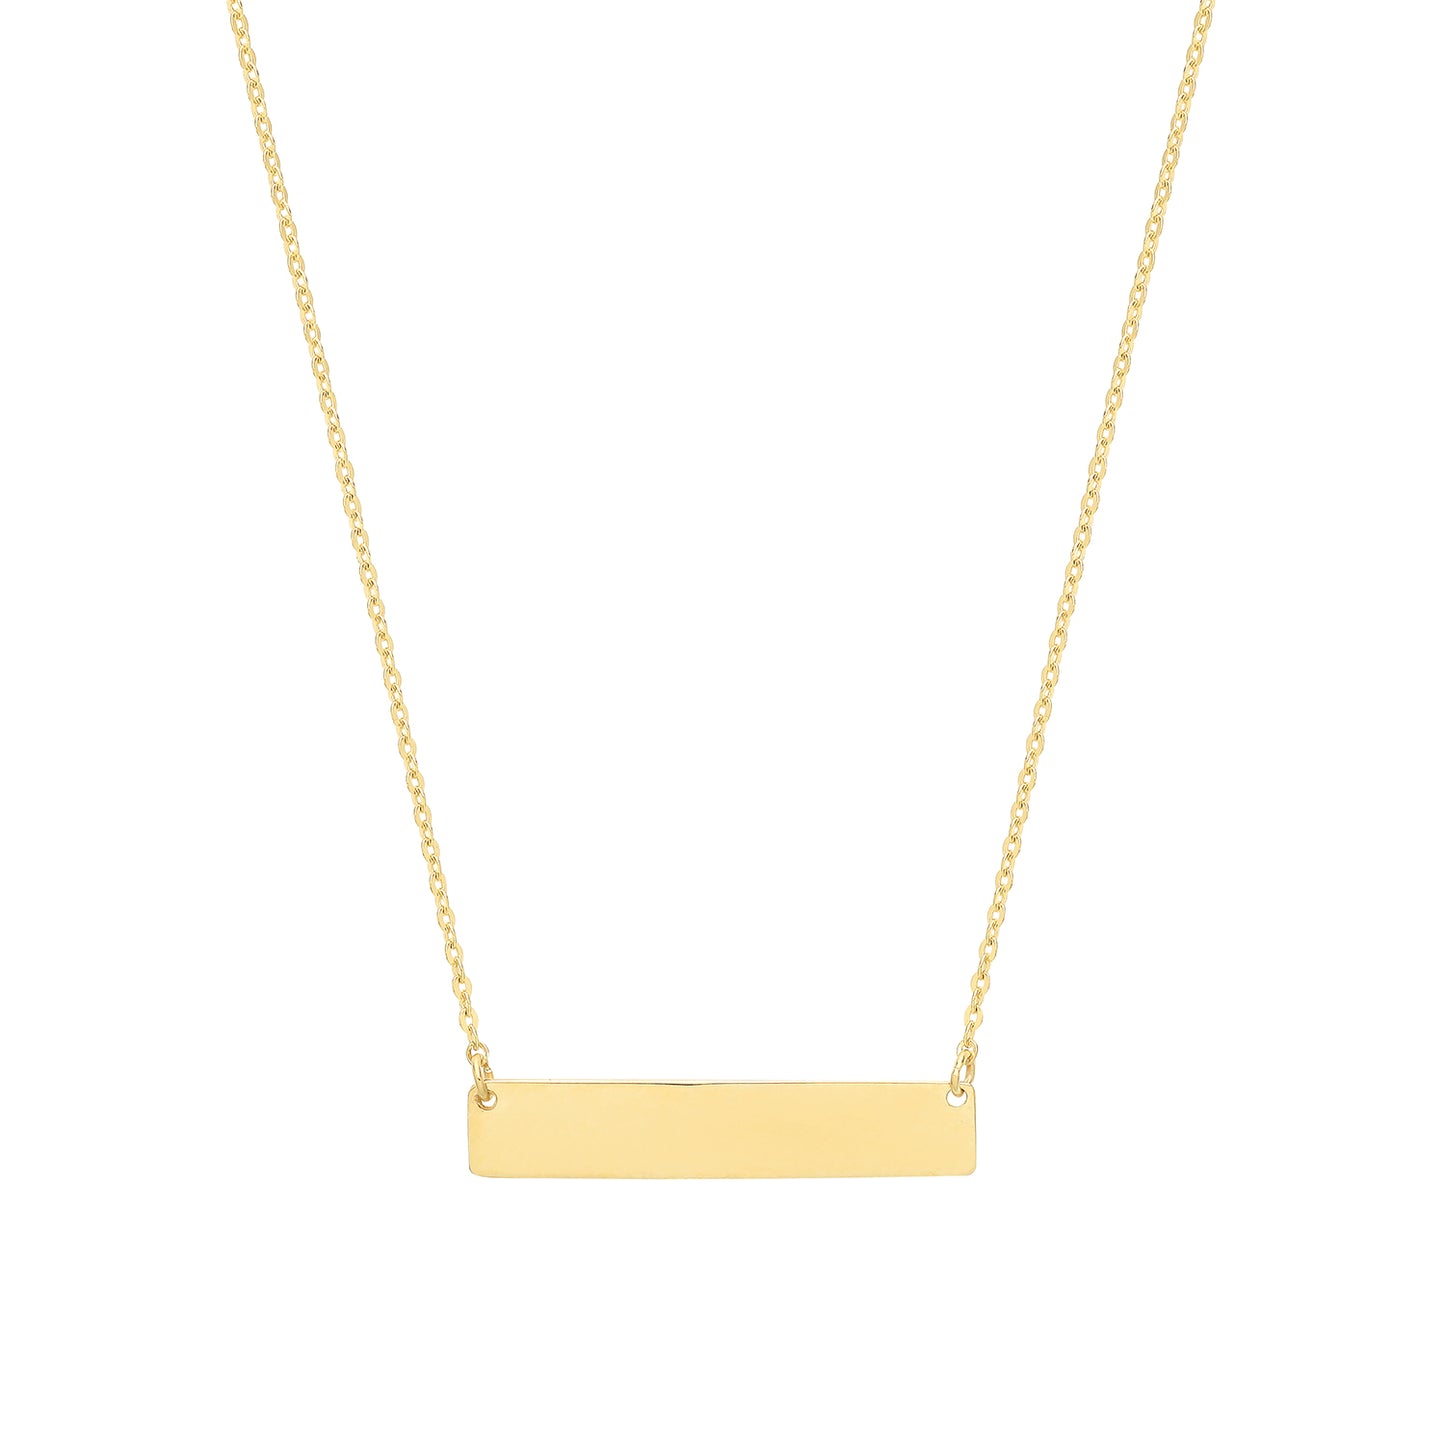 9ct Gold Engravable Necklet (free engraving)